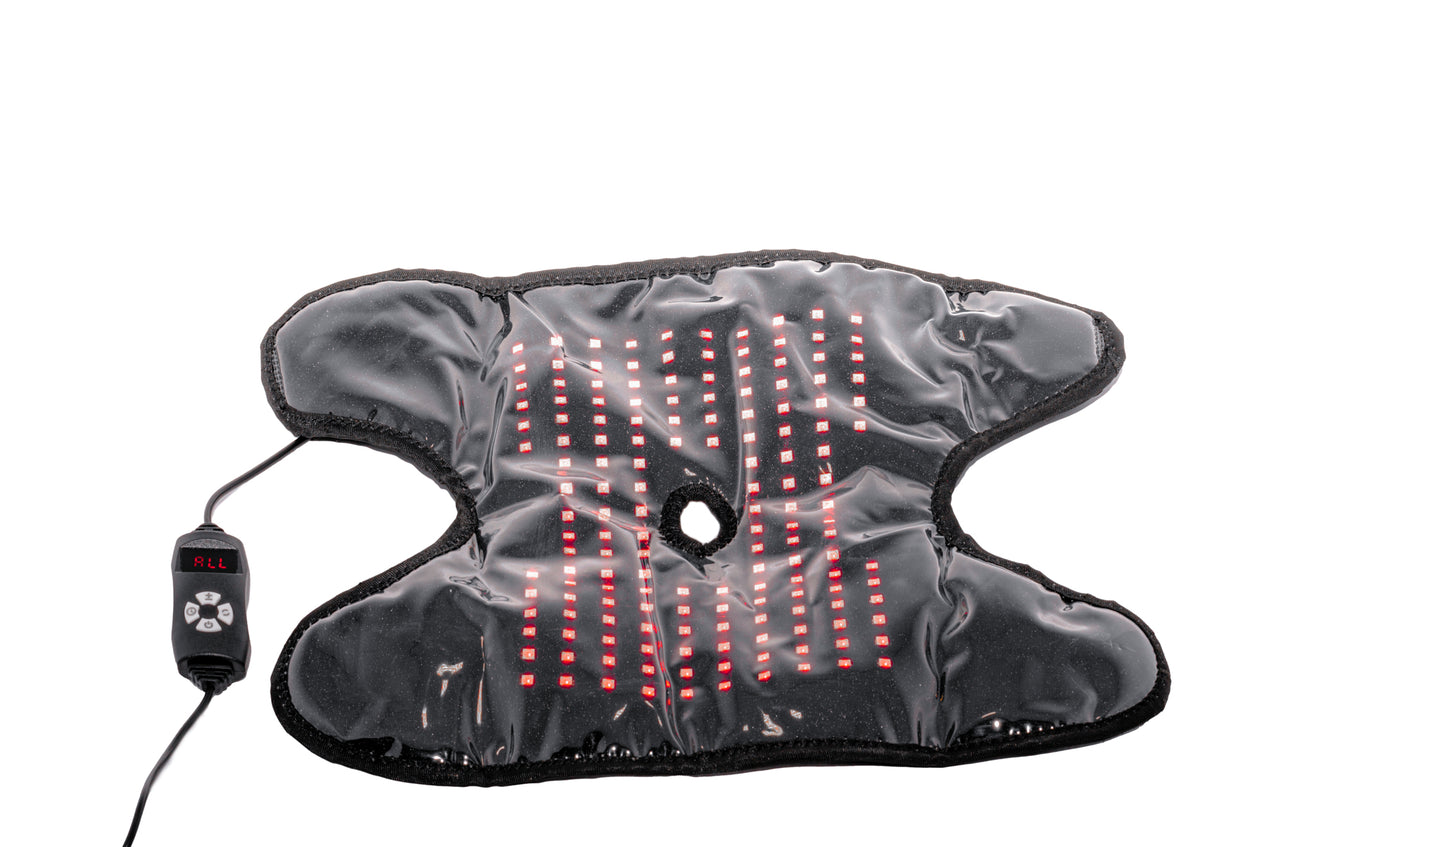 Red Light Ankle Pad With 516 powerful LED's